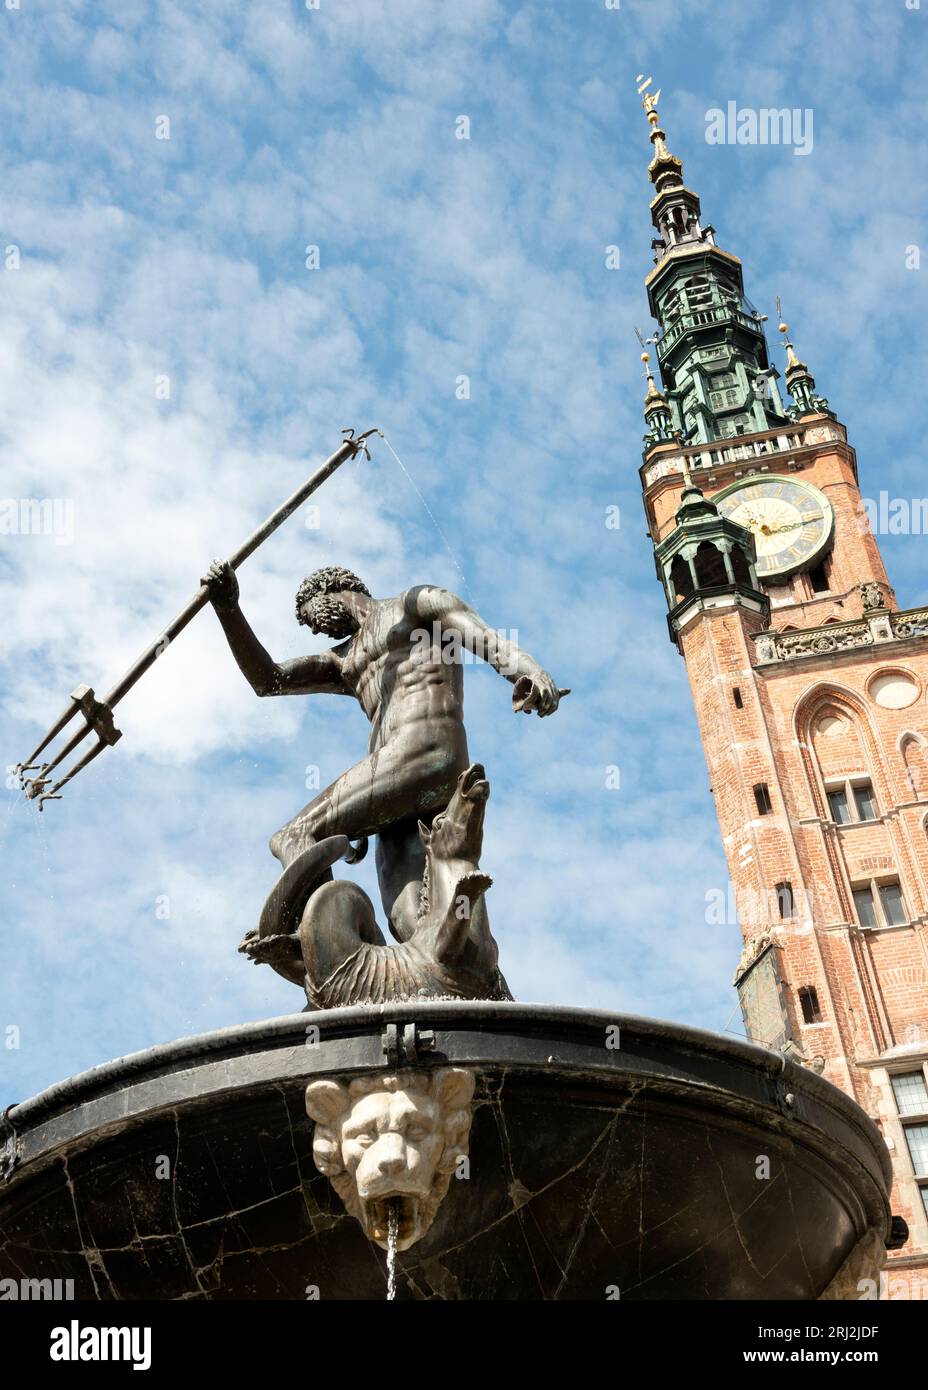 Neptune's fountain statue and The Main Town Hall in Dlugi Targ, Old Town of Gdansk, Poland, Europe, EU Stock Photo